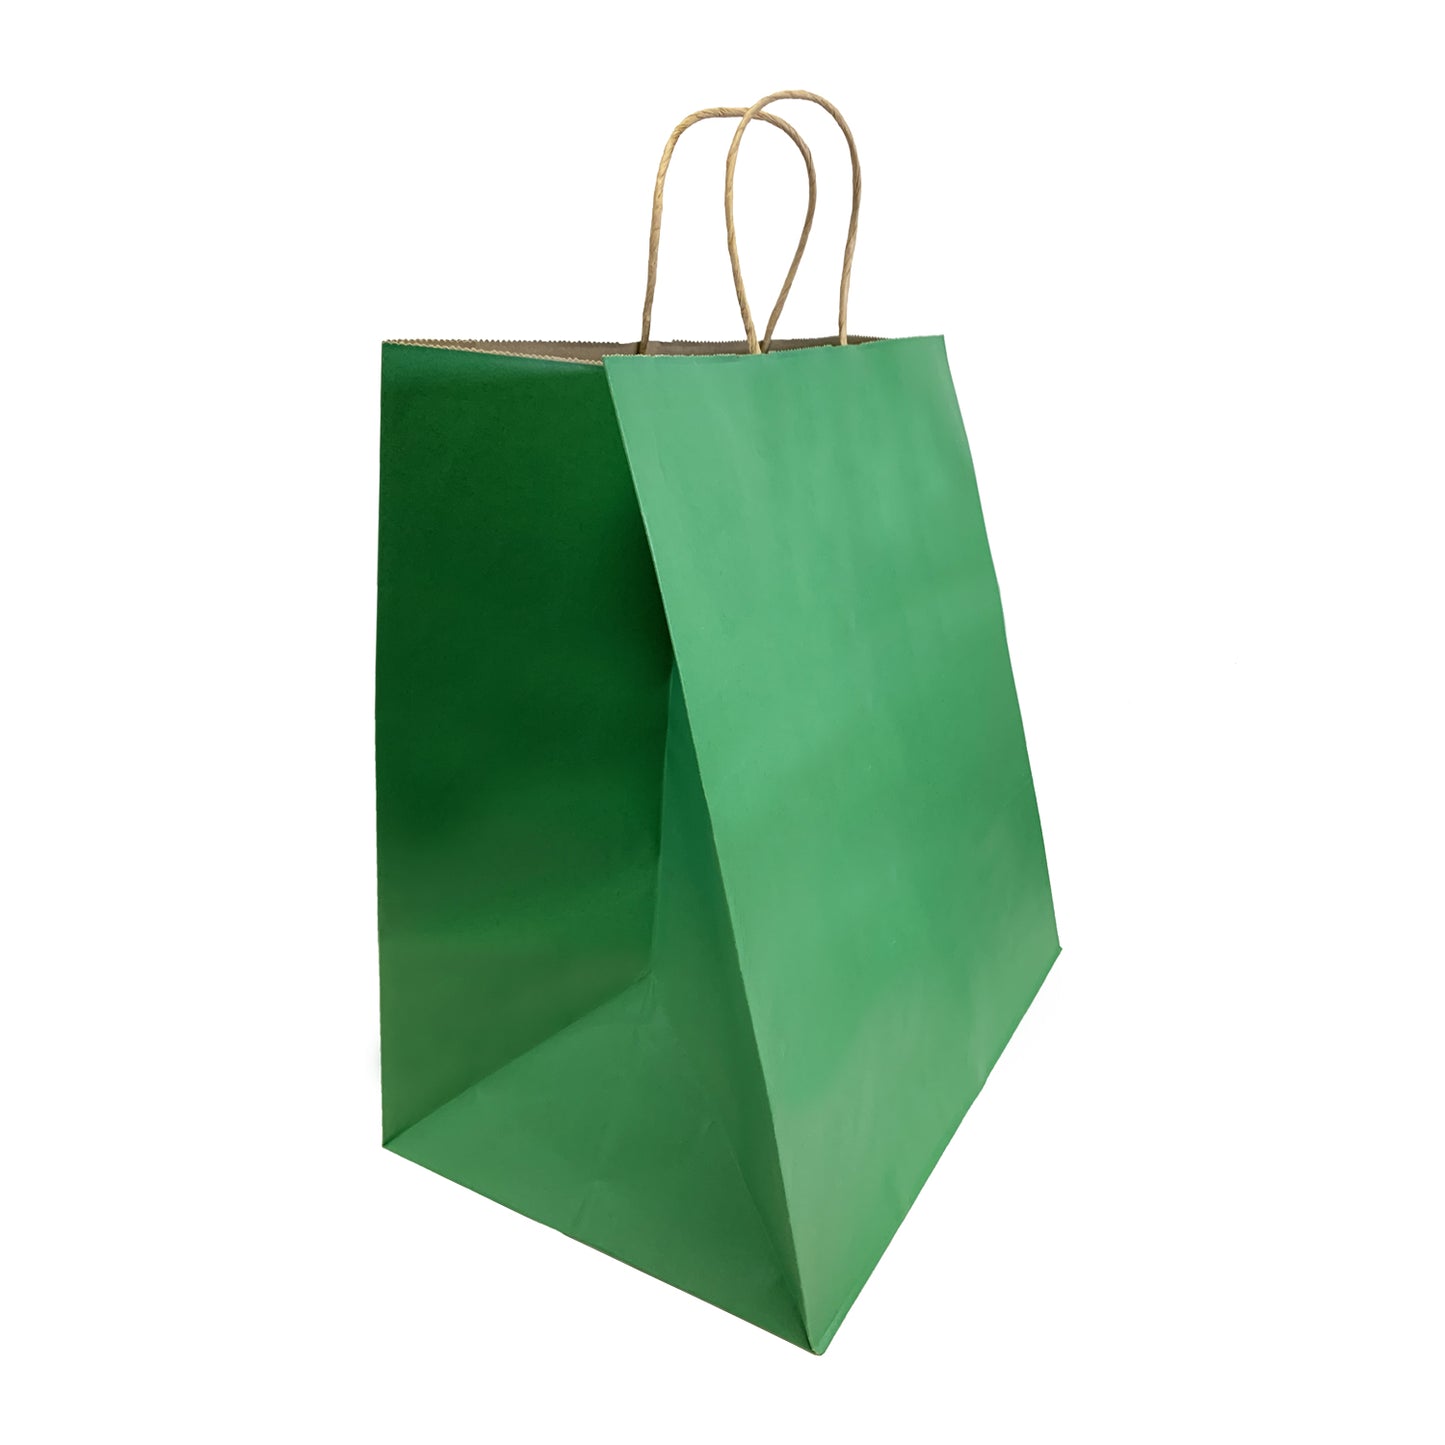 150 Pcs, Super Royal, 14x10x15.75 inches, Green Kraft Paper Bags, with Twisted Handle